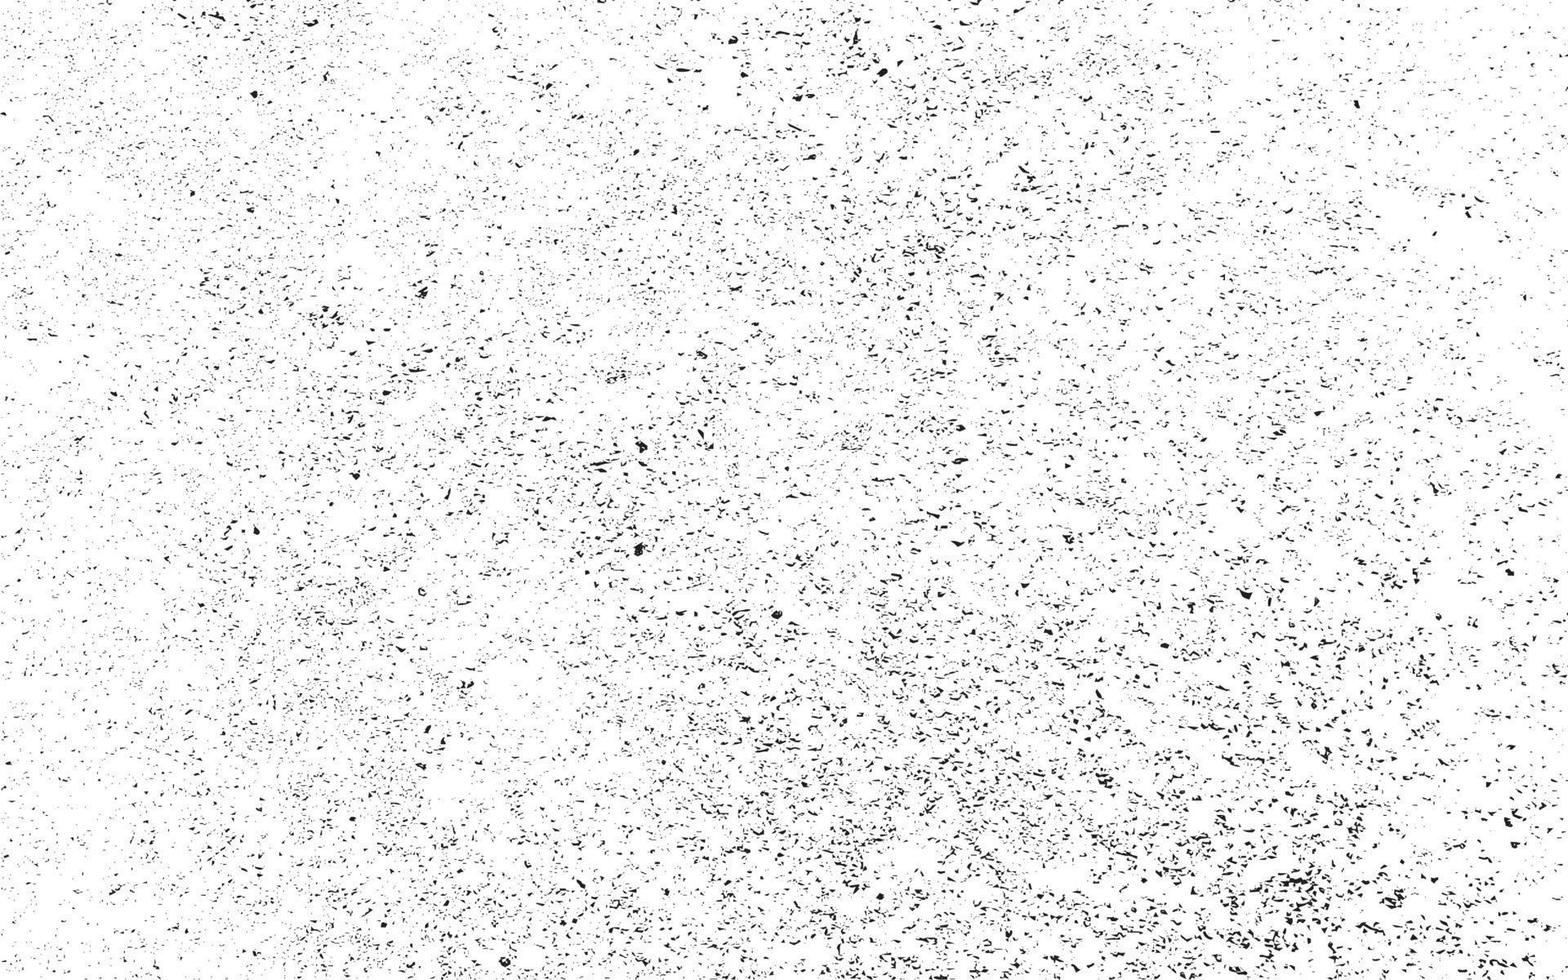 Grunge texture effect. Distressed overlay rough textured. Abstract vintage monochrome. Black isolated on white background. Graphic design element halftone style concept for banner, flyer, poster, etc vector